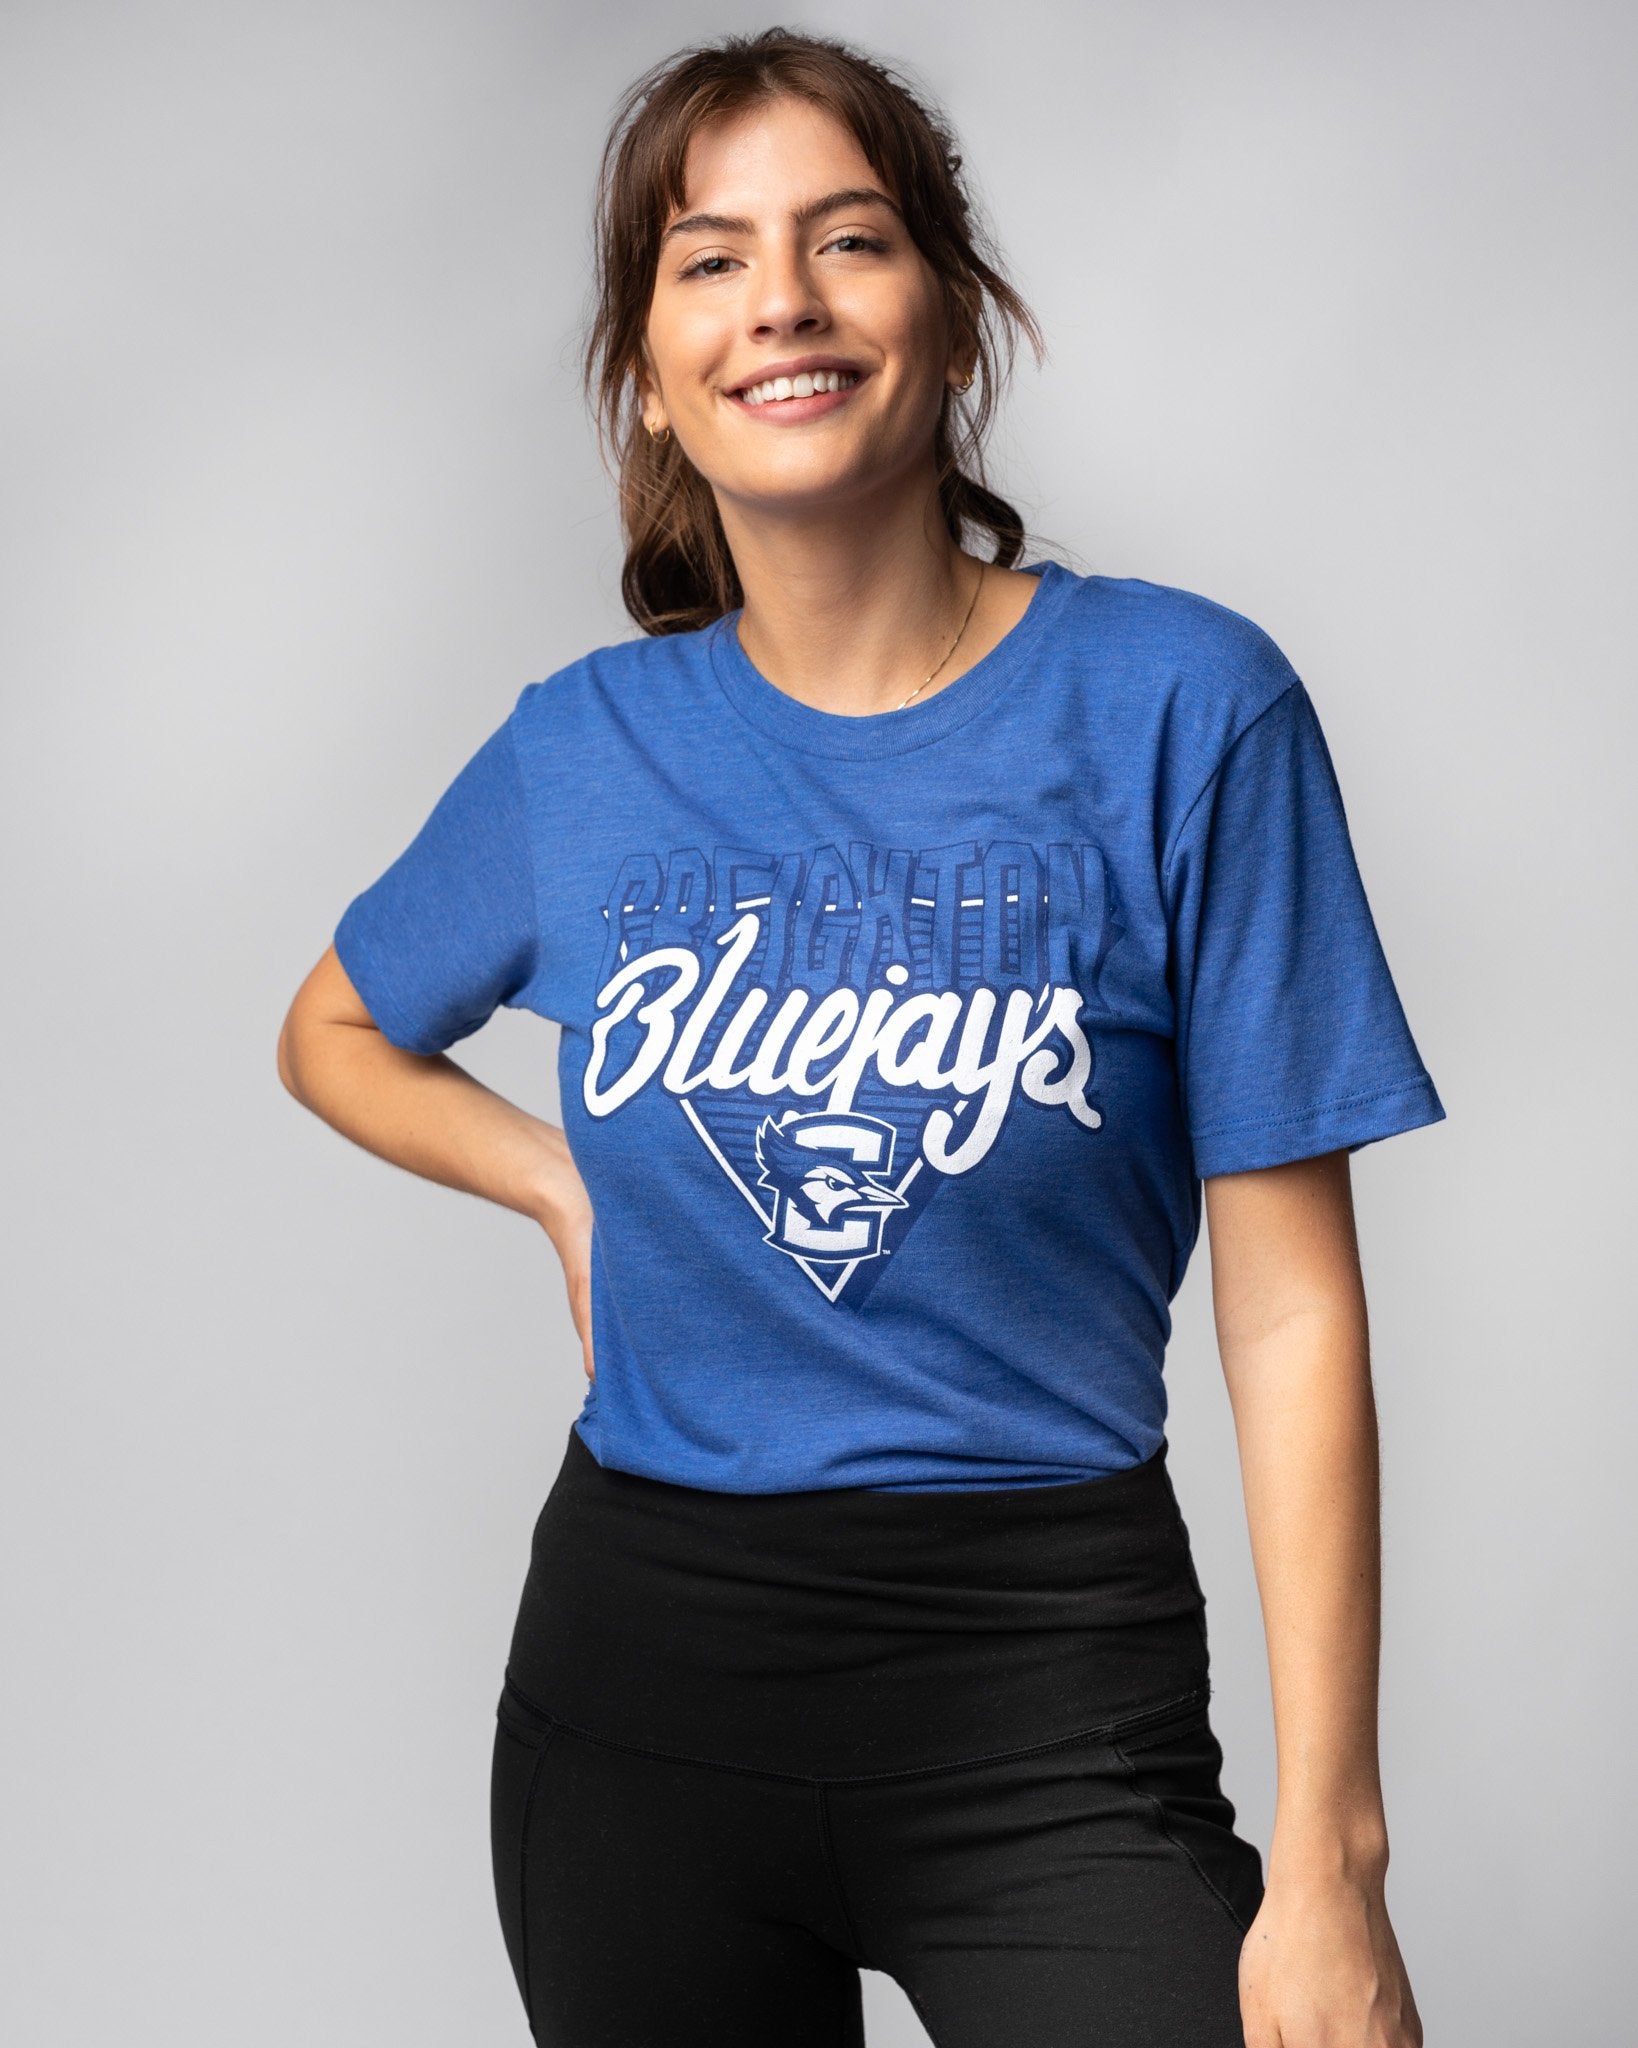 80's Knoxville Blue Jays T-Shirt – Trippy Vintage